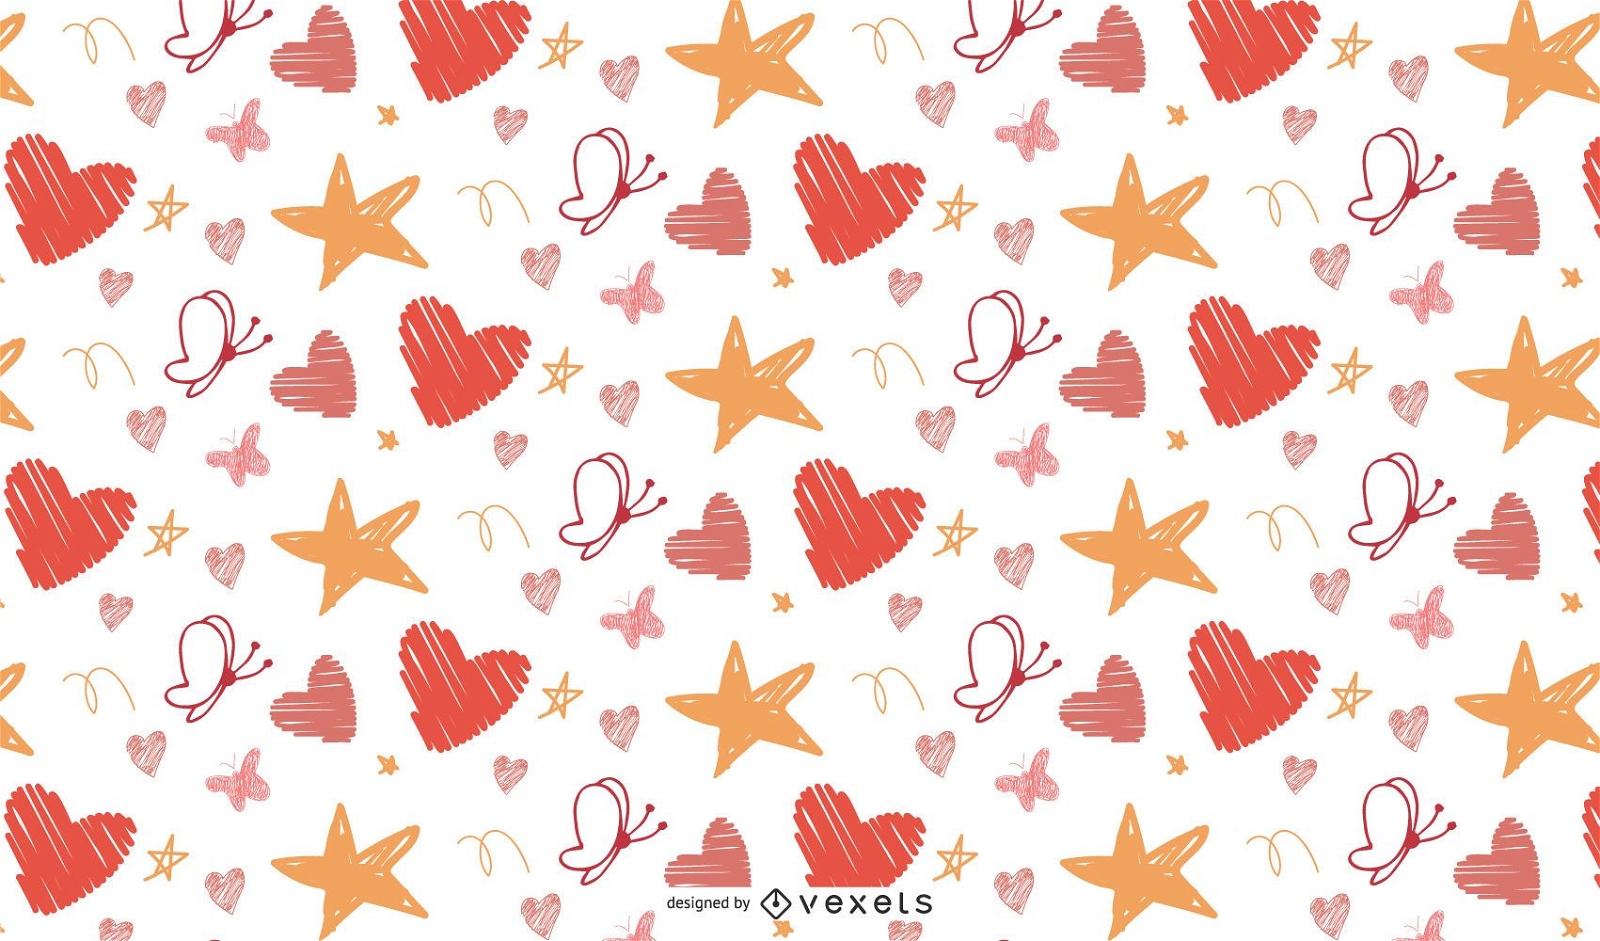 Butterly hearts and star patern vector